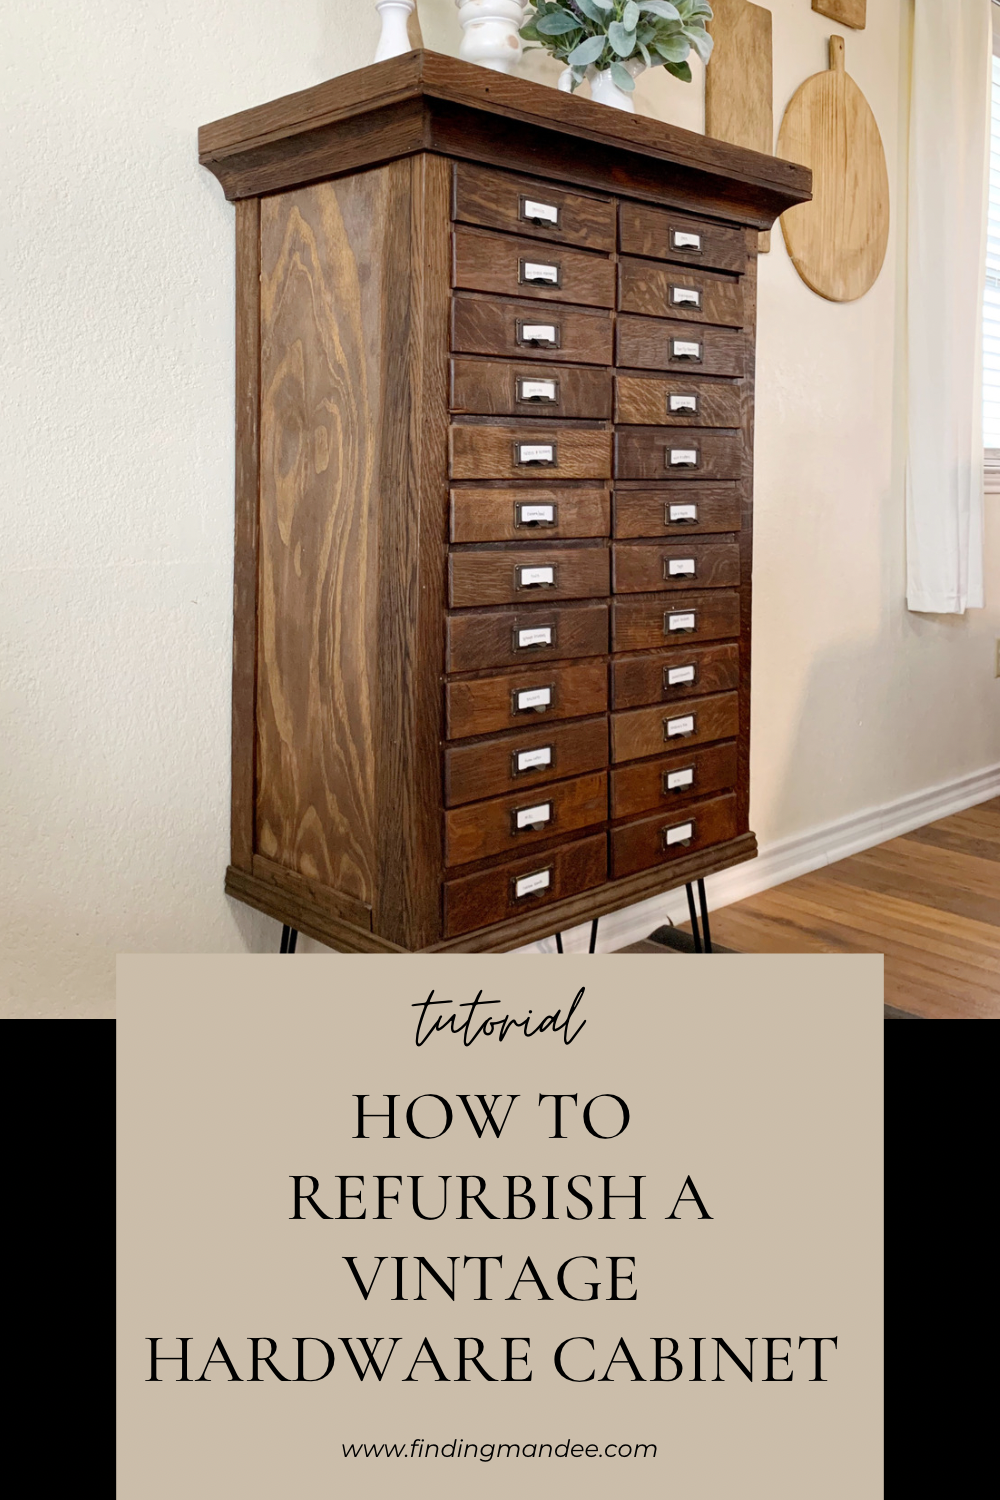 How to Refurbish a Vintage Hardware Cabinet: A Tutorial | Finding Mandee